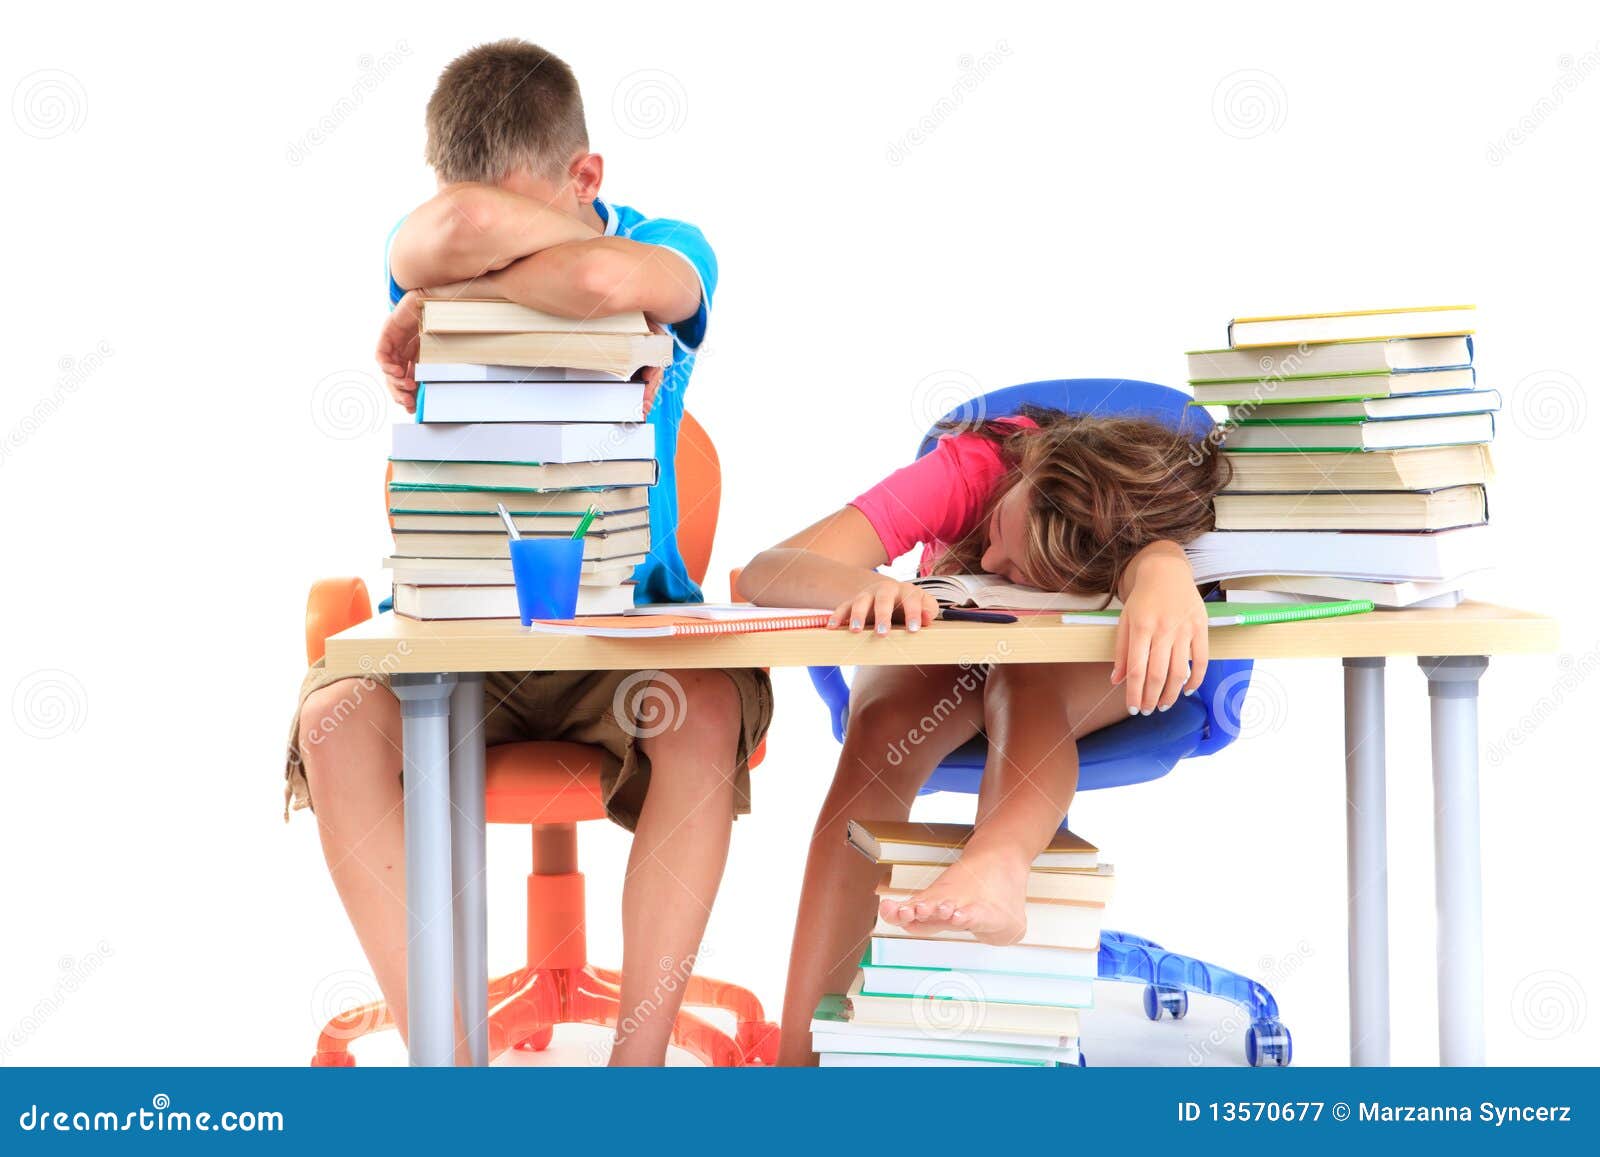 students asleep after studying